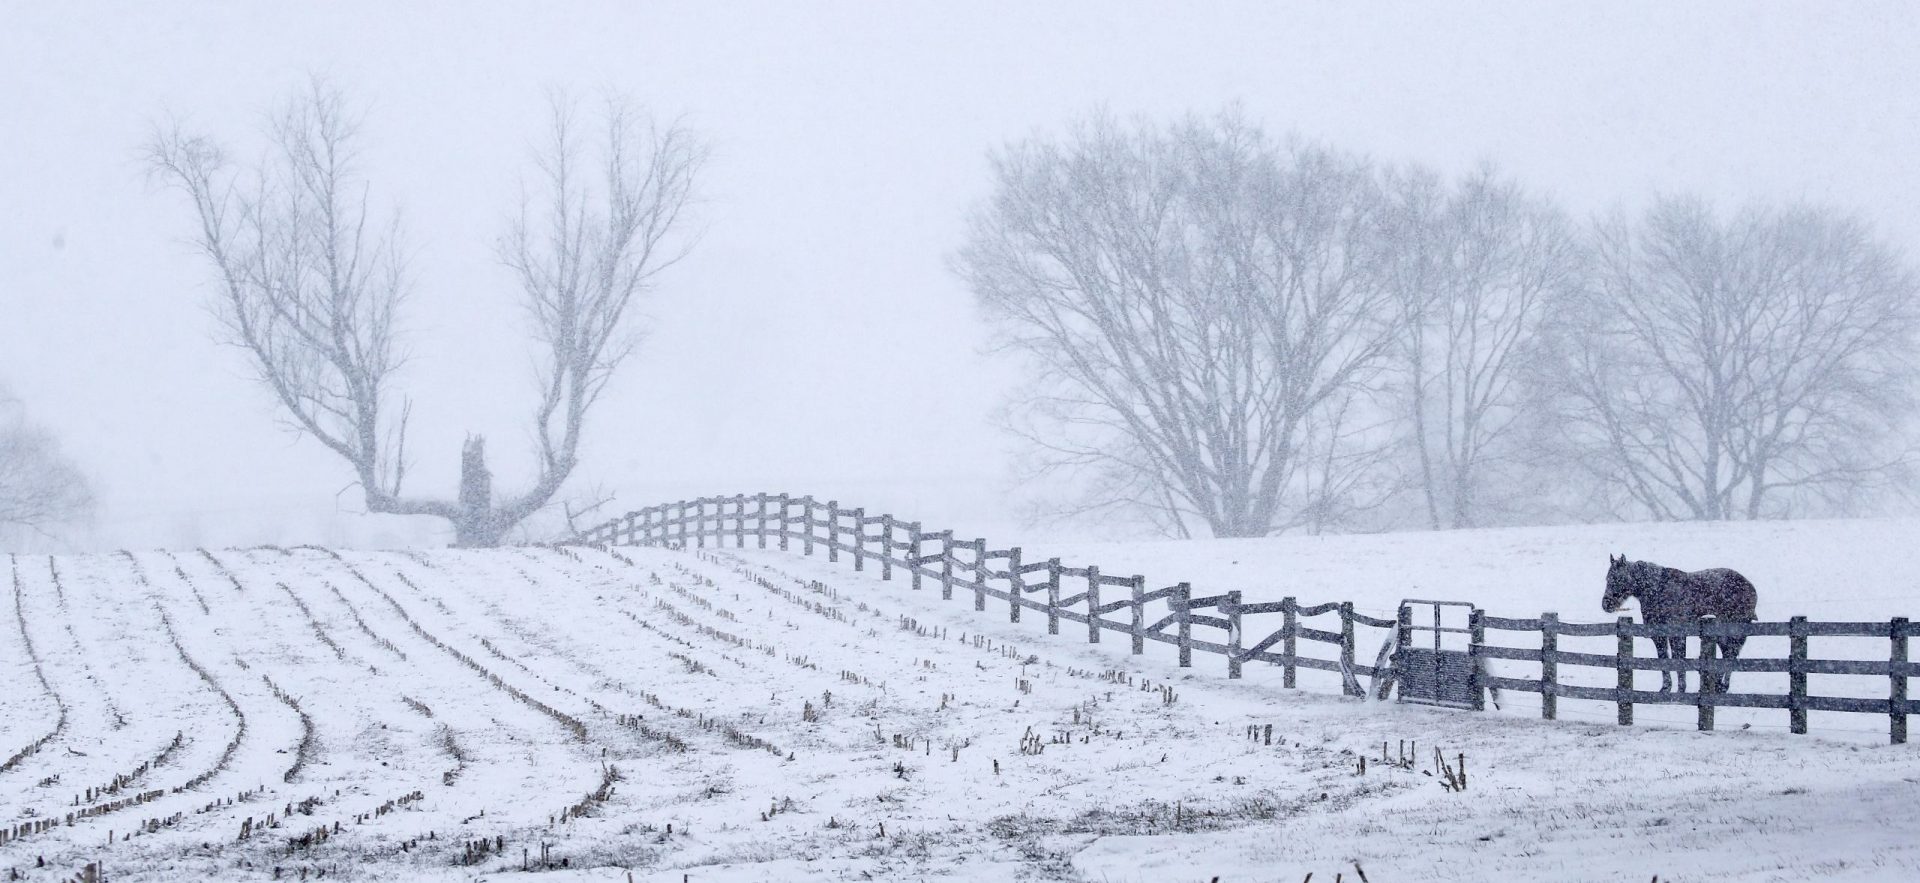 A lone horse stands near a fence row on a Lancaster County, Pennsylvania farm Sunday, January 31, 2021 as the Northeast braces for a whopper of a storm that could dump well over a foot of snow in many areas and create blizzard-like conditions.